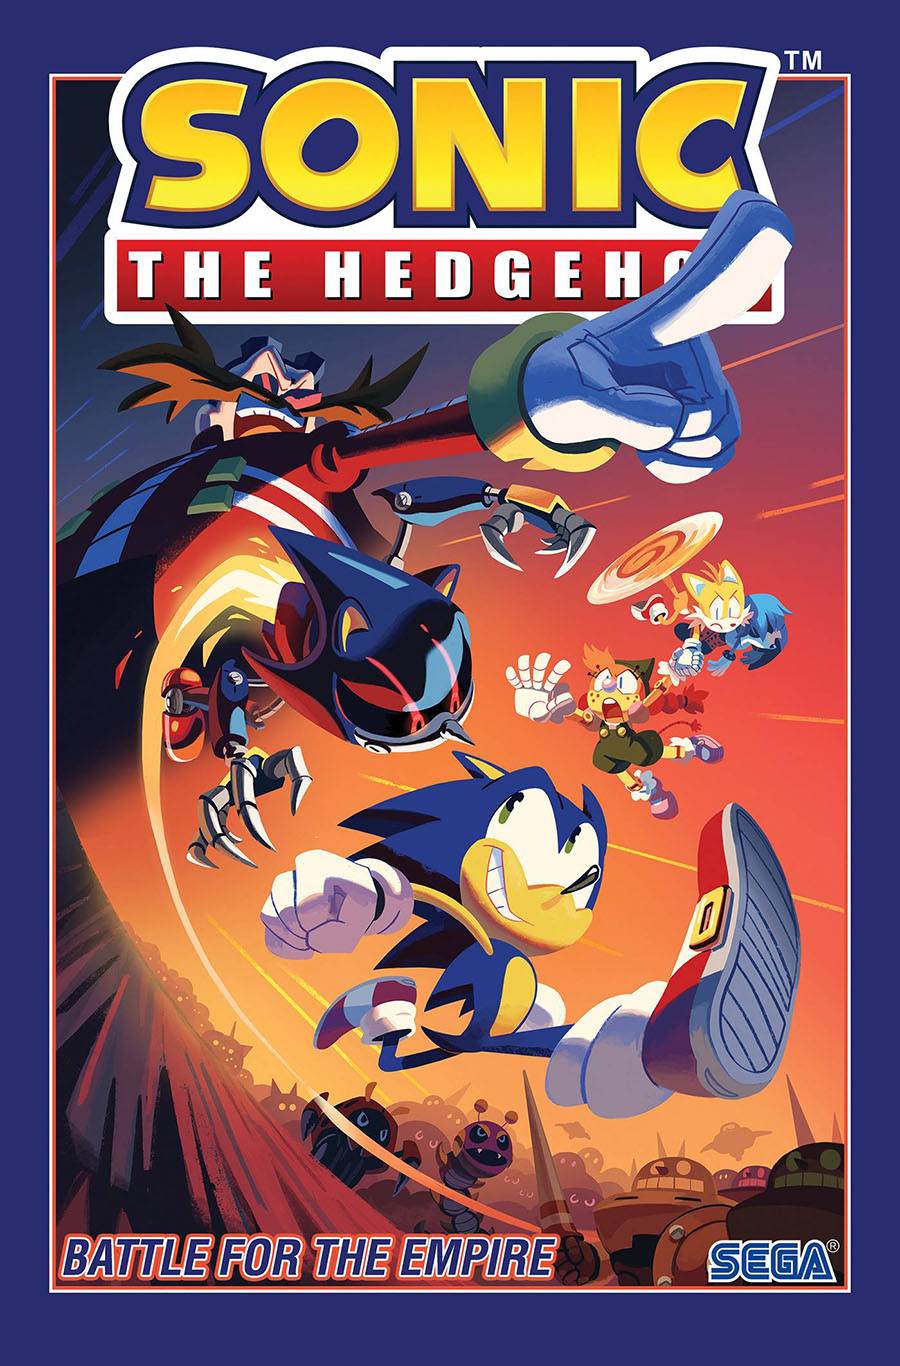 Sonic The Hedgehog (IDW) Vol 13 Battle For The Empire TP